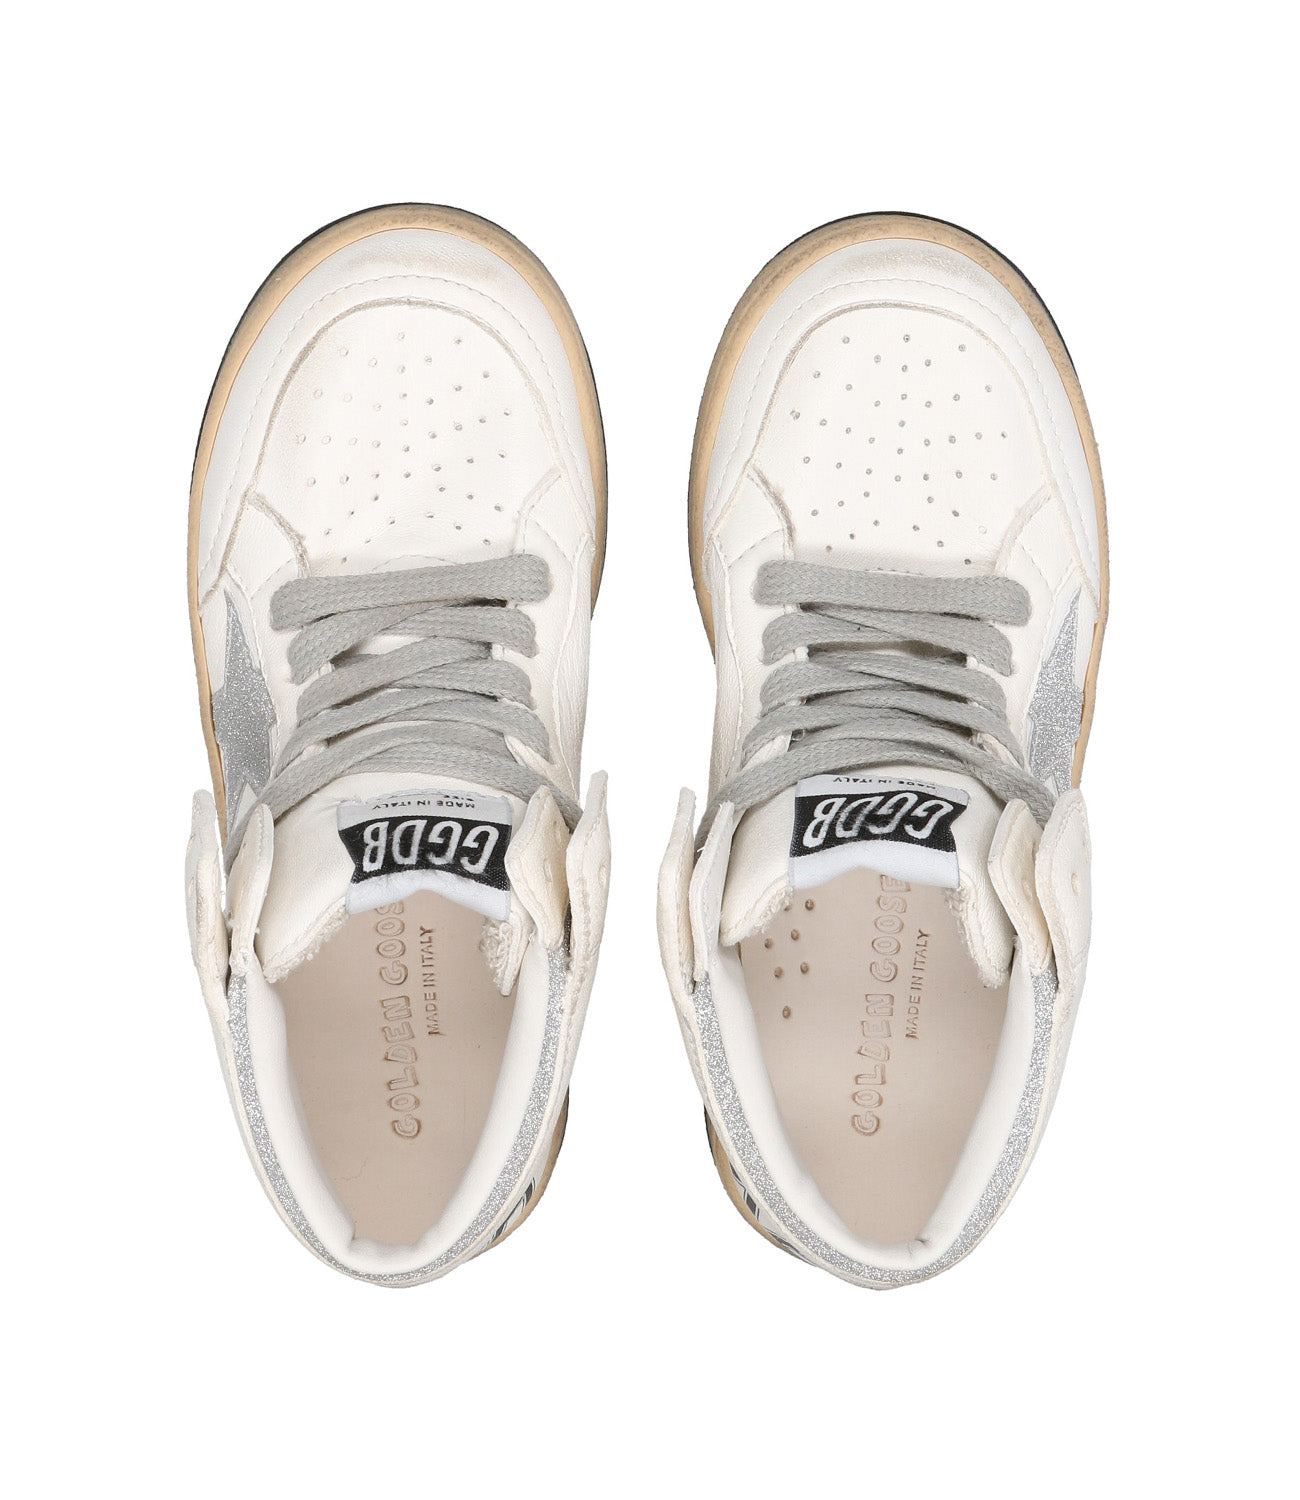 Golden Goose | Sky Star Sneakers White and Silver